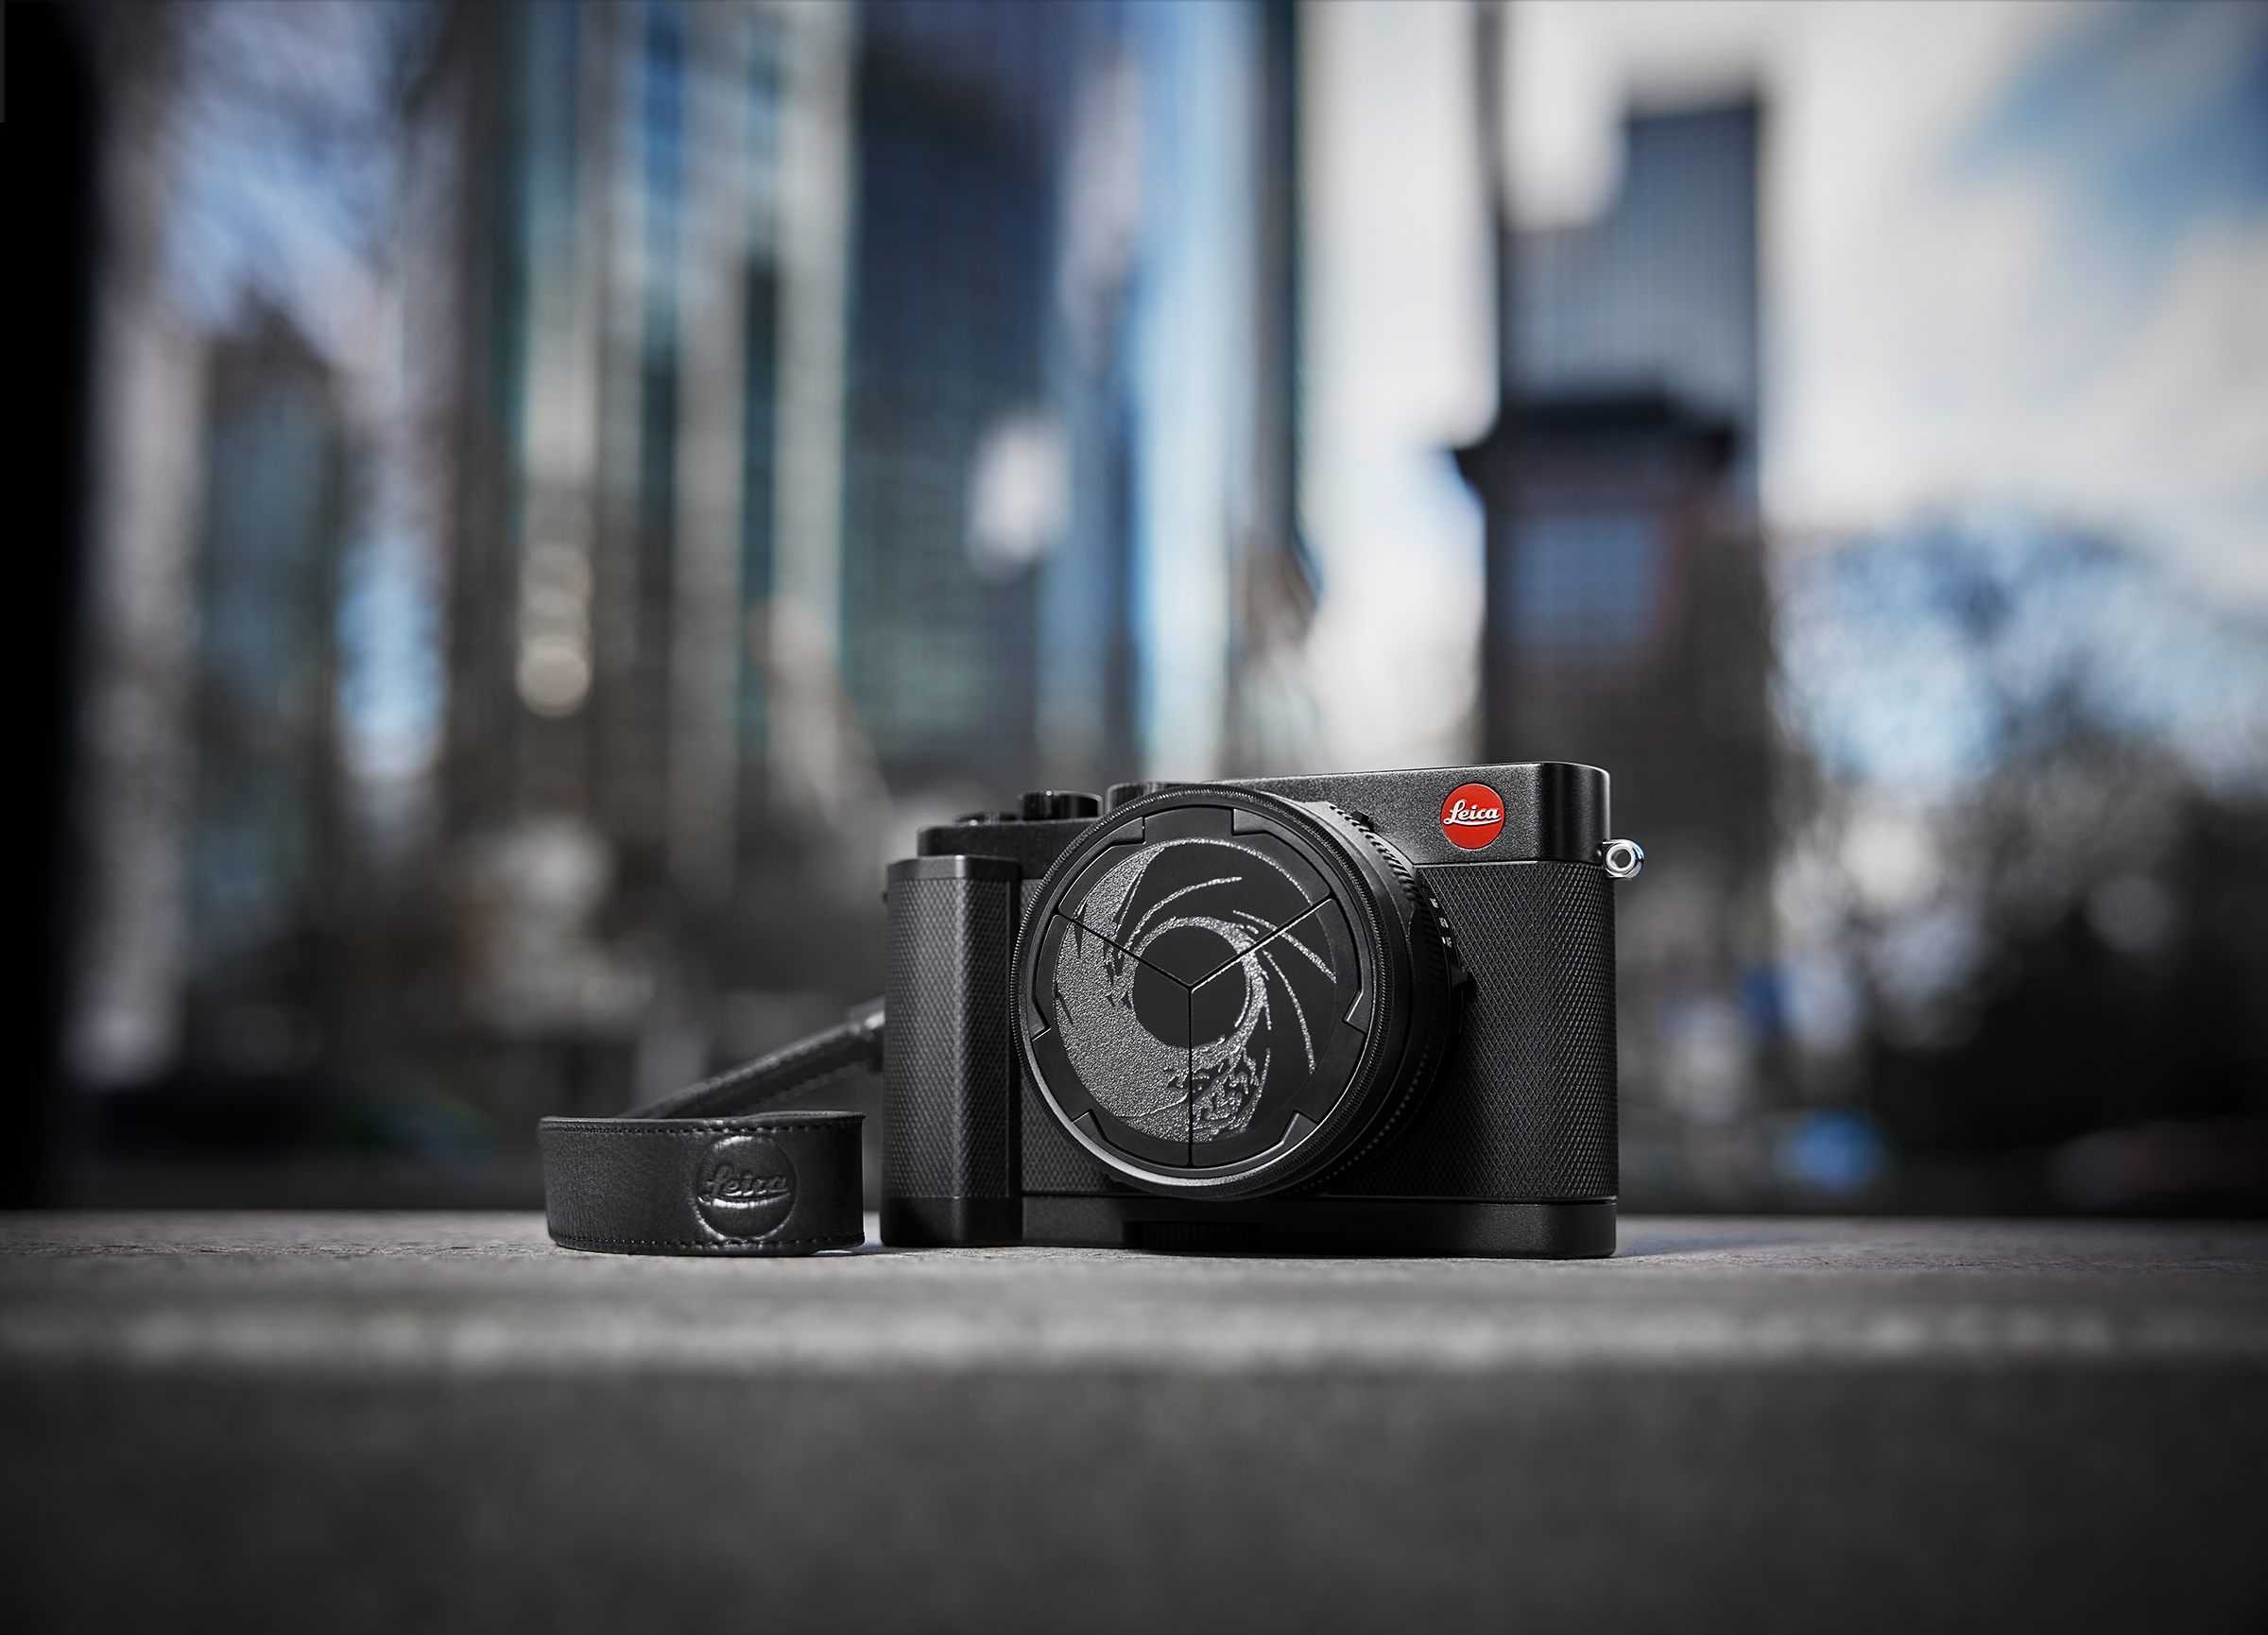 The Leica D-LUX 7 007 Edition Is a Beautiful Ode to James Bond